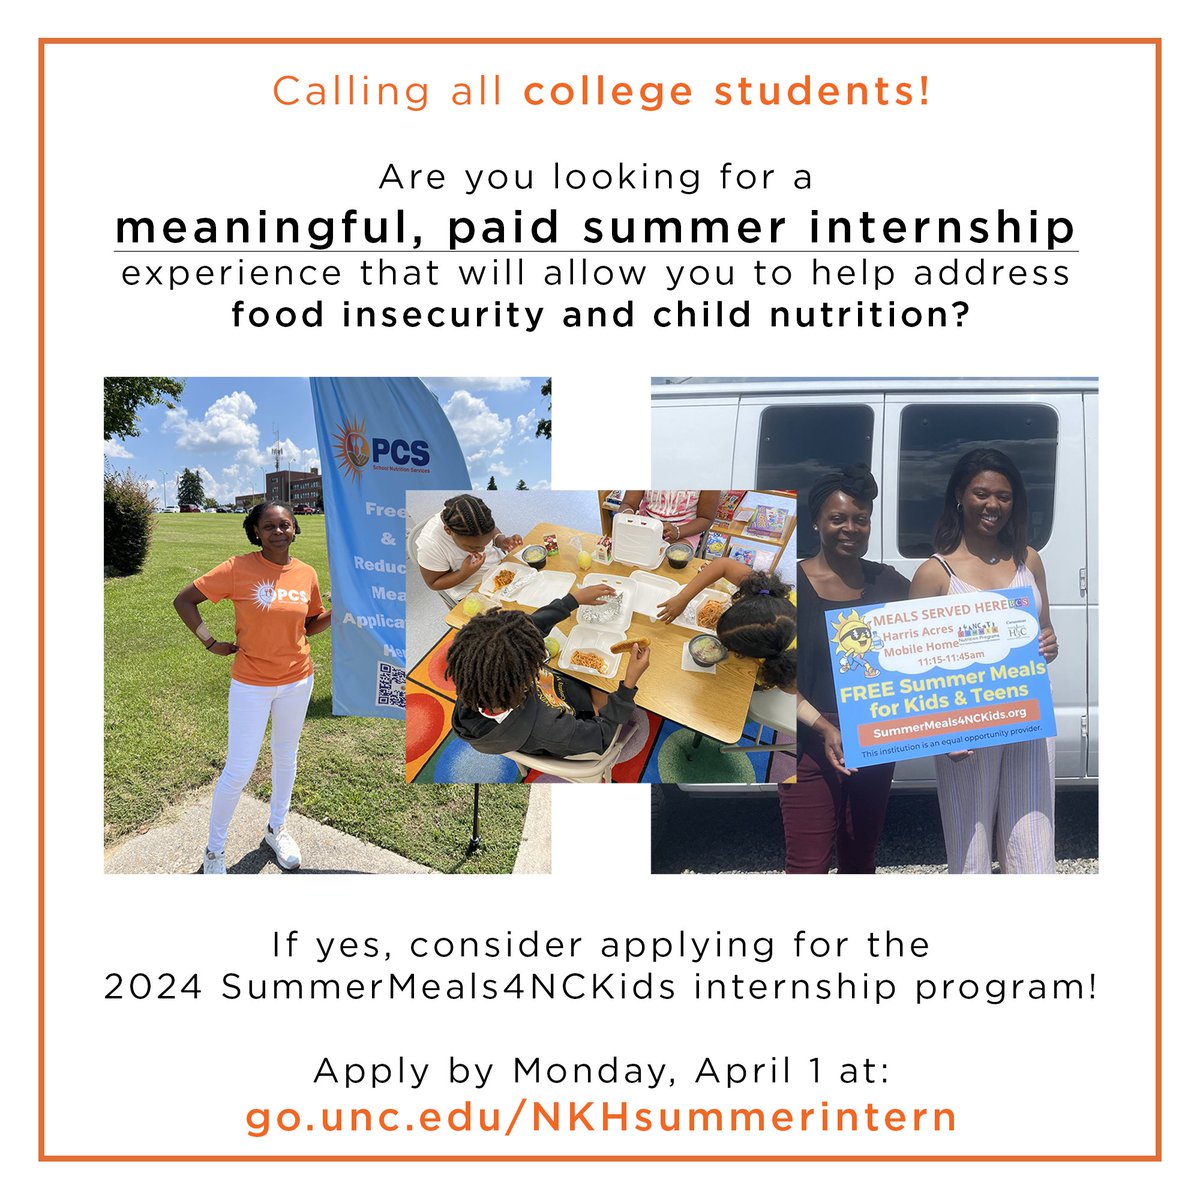 Calling all college students! Are you looking for a meaningful, paid summer internship experience that will allow you to help address food insecurity and child nutrition? If yes, consider applying for the SummerMeals4NCKids internship! Learn more at go.unc.edu/NKHsummerintern